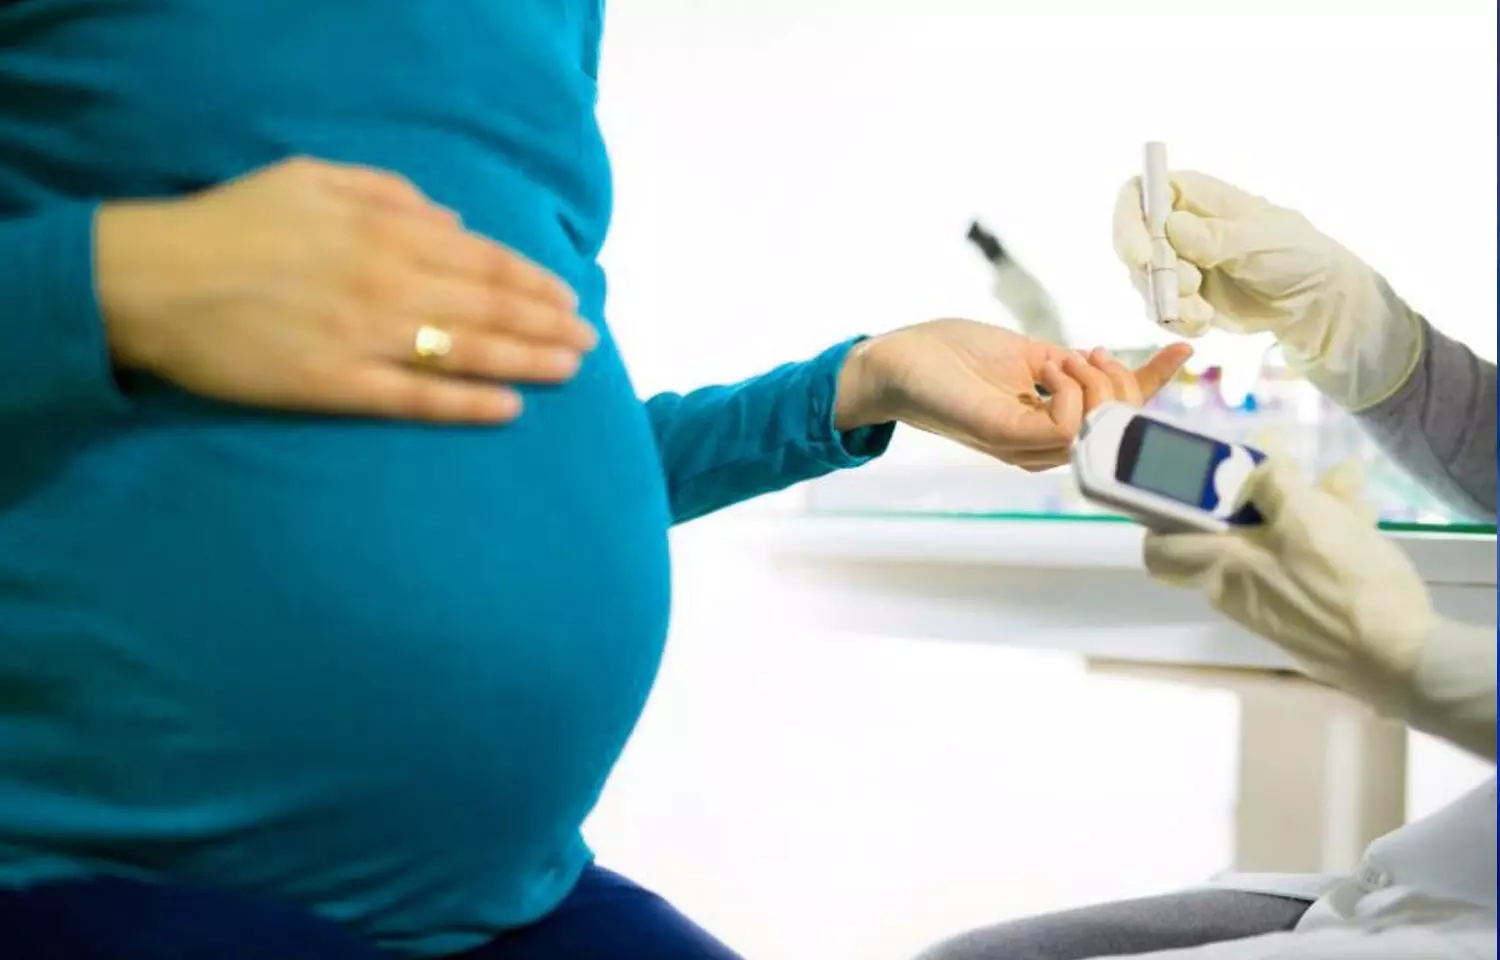 Diabetes in pregnancy tied to poor sleep quality, excessive daytime sleepiness: Study